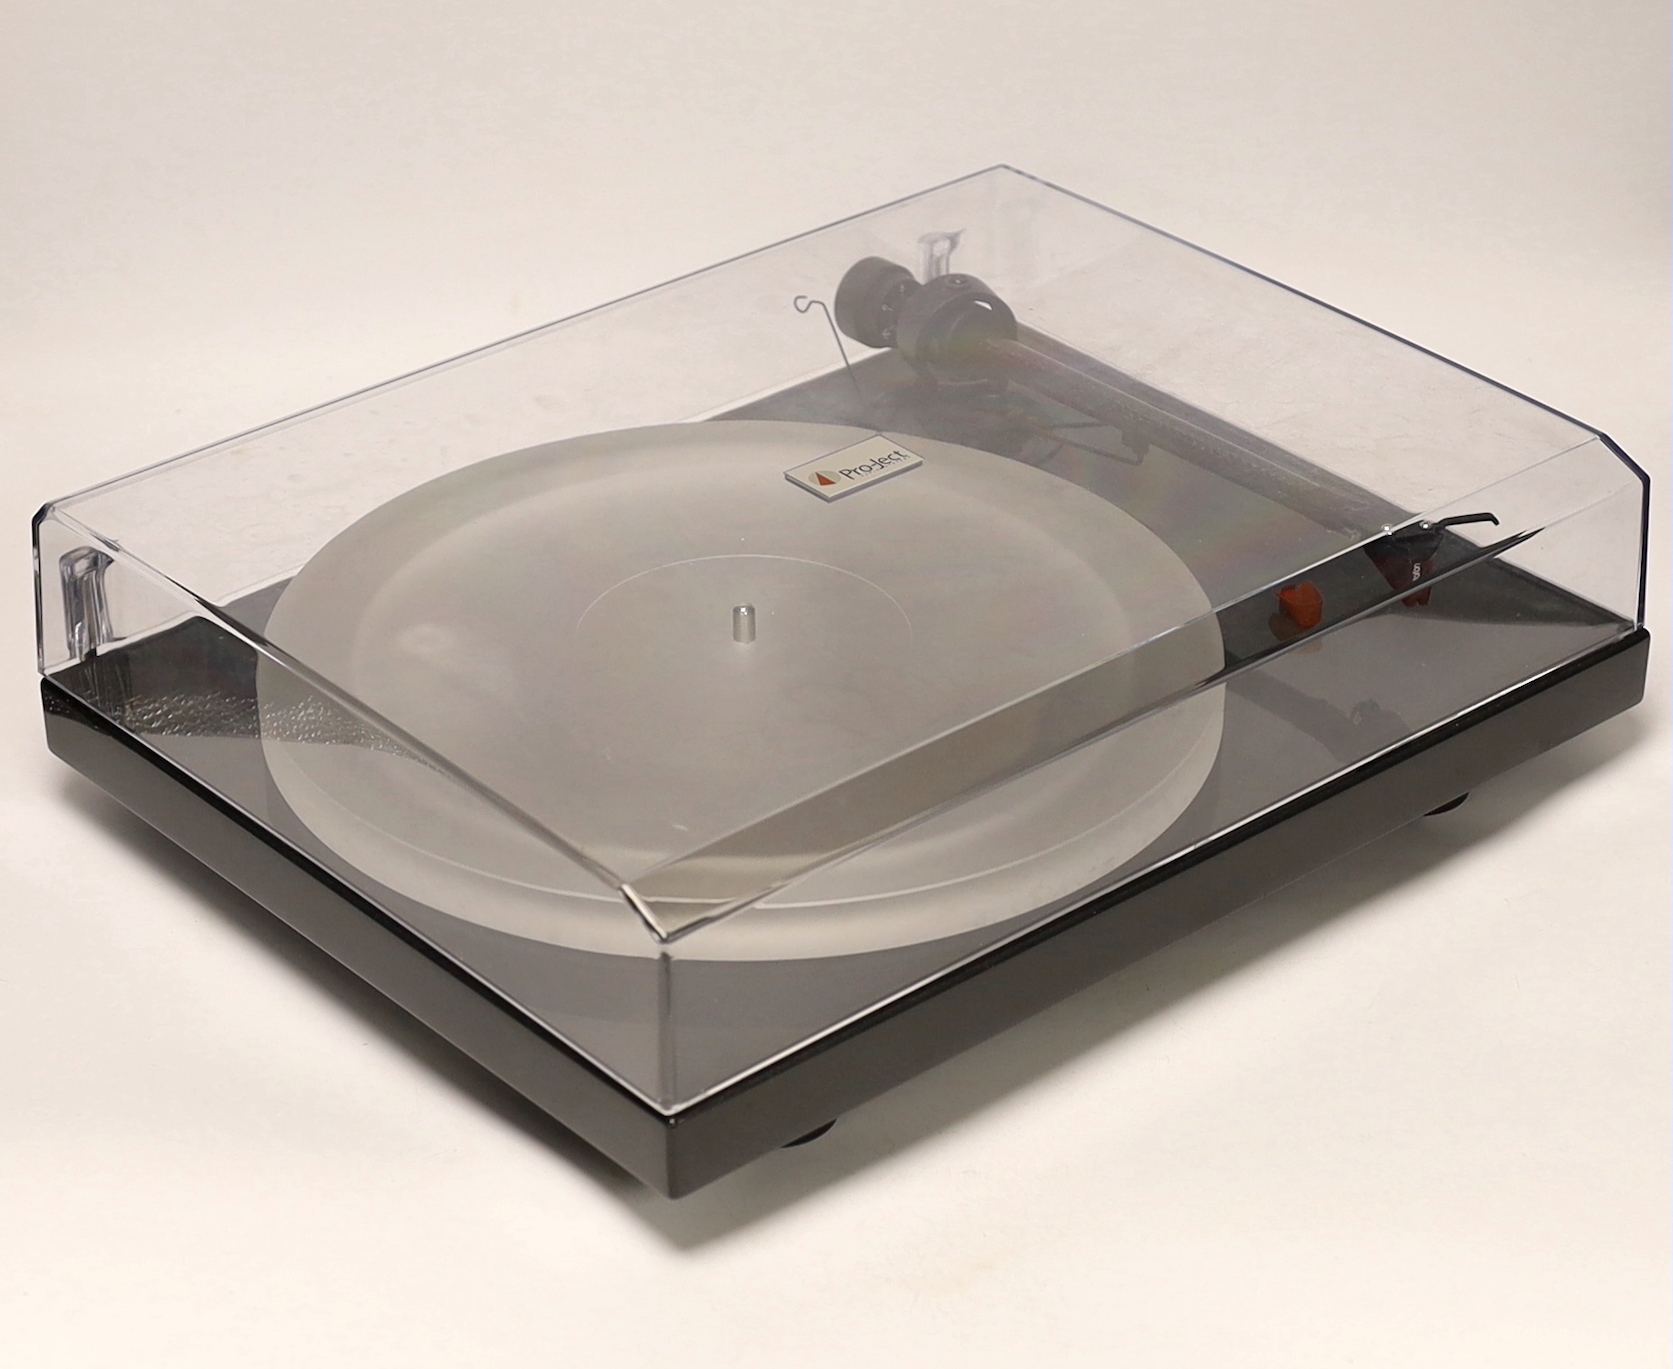 A Pro-ject I-Xpression III turntable